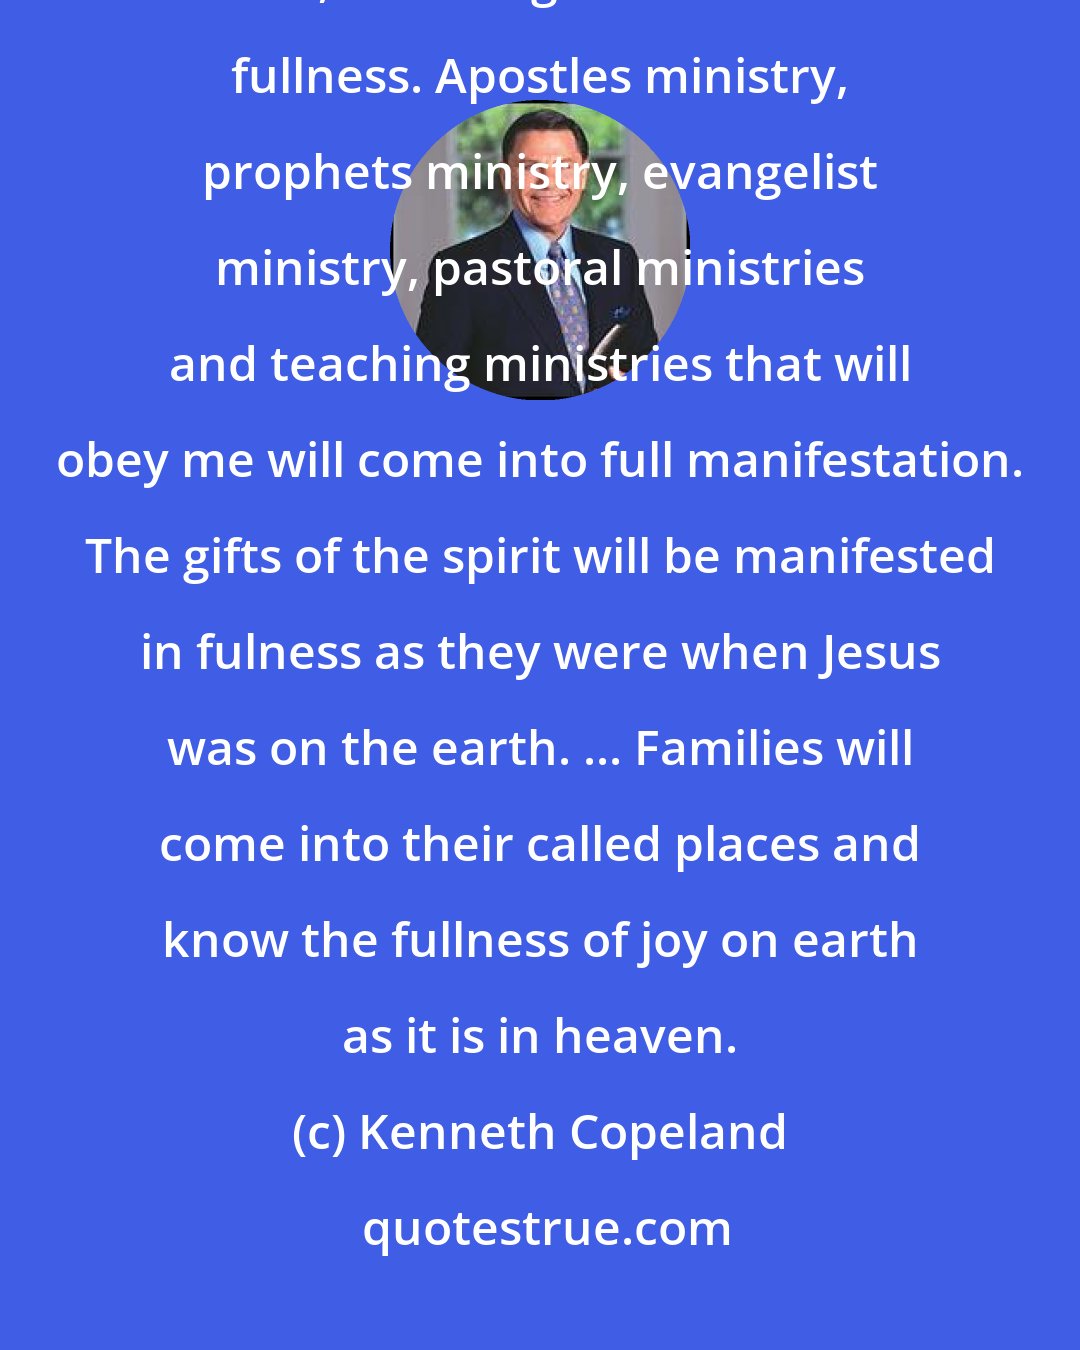 Kenneth Copeland: The year of 2004 will be known as the year of fullness. By the close of 2004, all callings will come to fullness. Apostles ministry, prophets ministry, evangelist ministry, pastoral ministries and teaching ministries that will obey me will come into full manifestation. The gifts of the spirit will be manifested in fulness as they were when Jesus was on the earth. ... Families will come into their called places and know the fullness of joy on earth as it is in heaven.